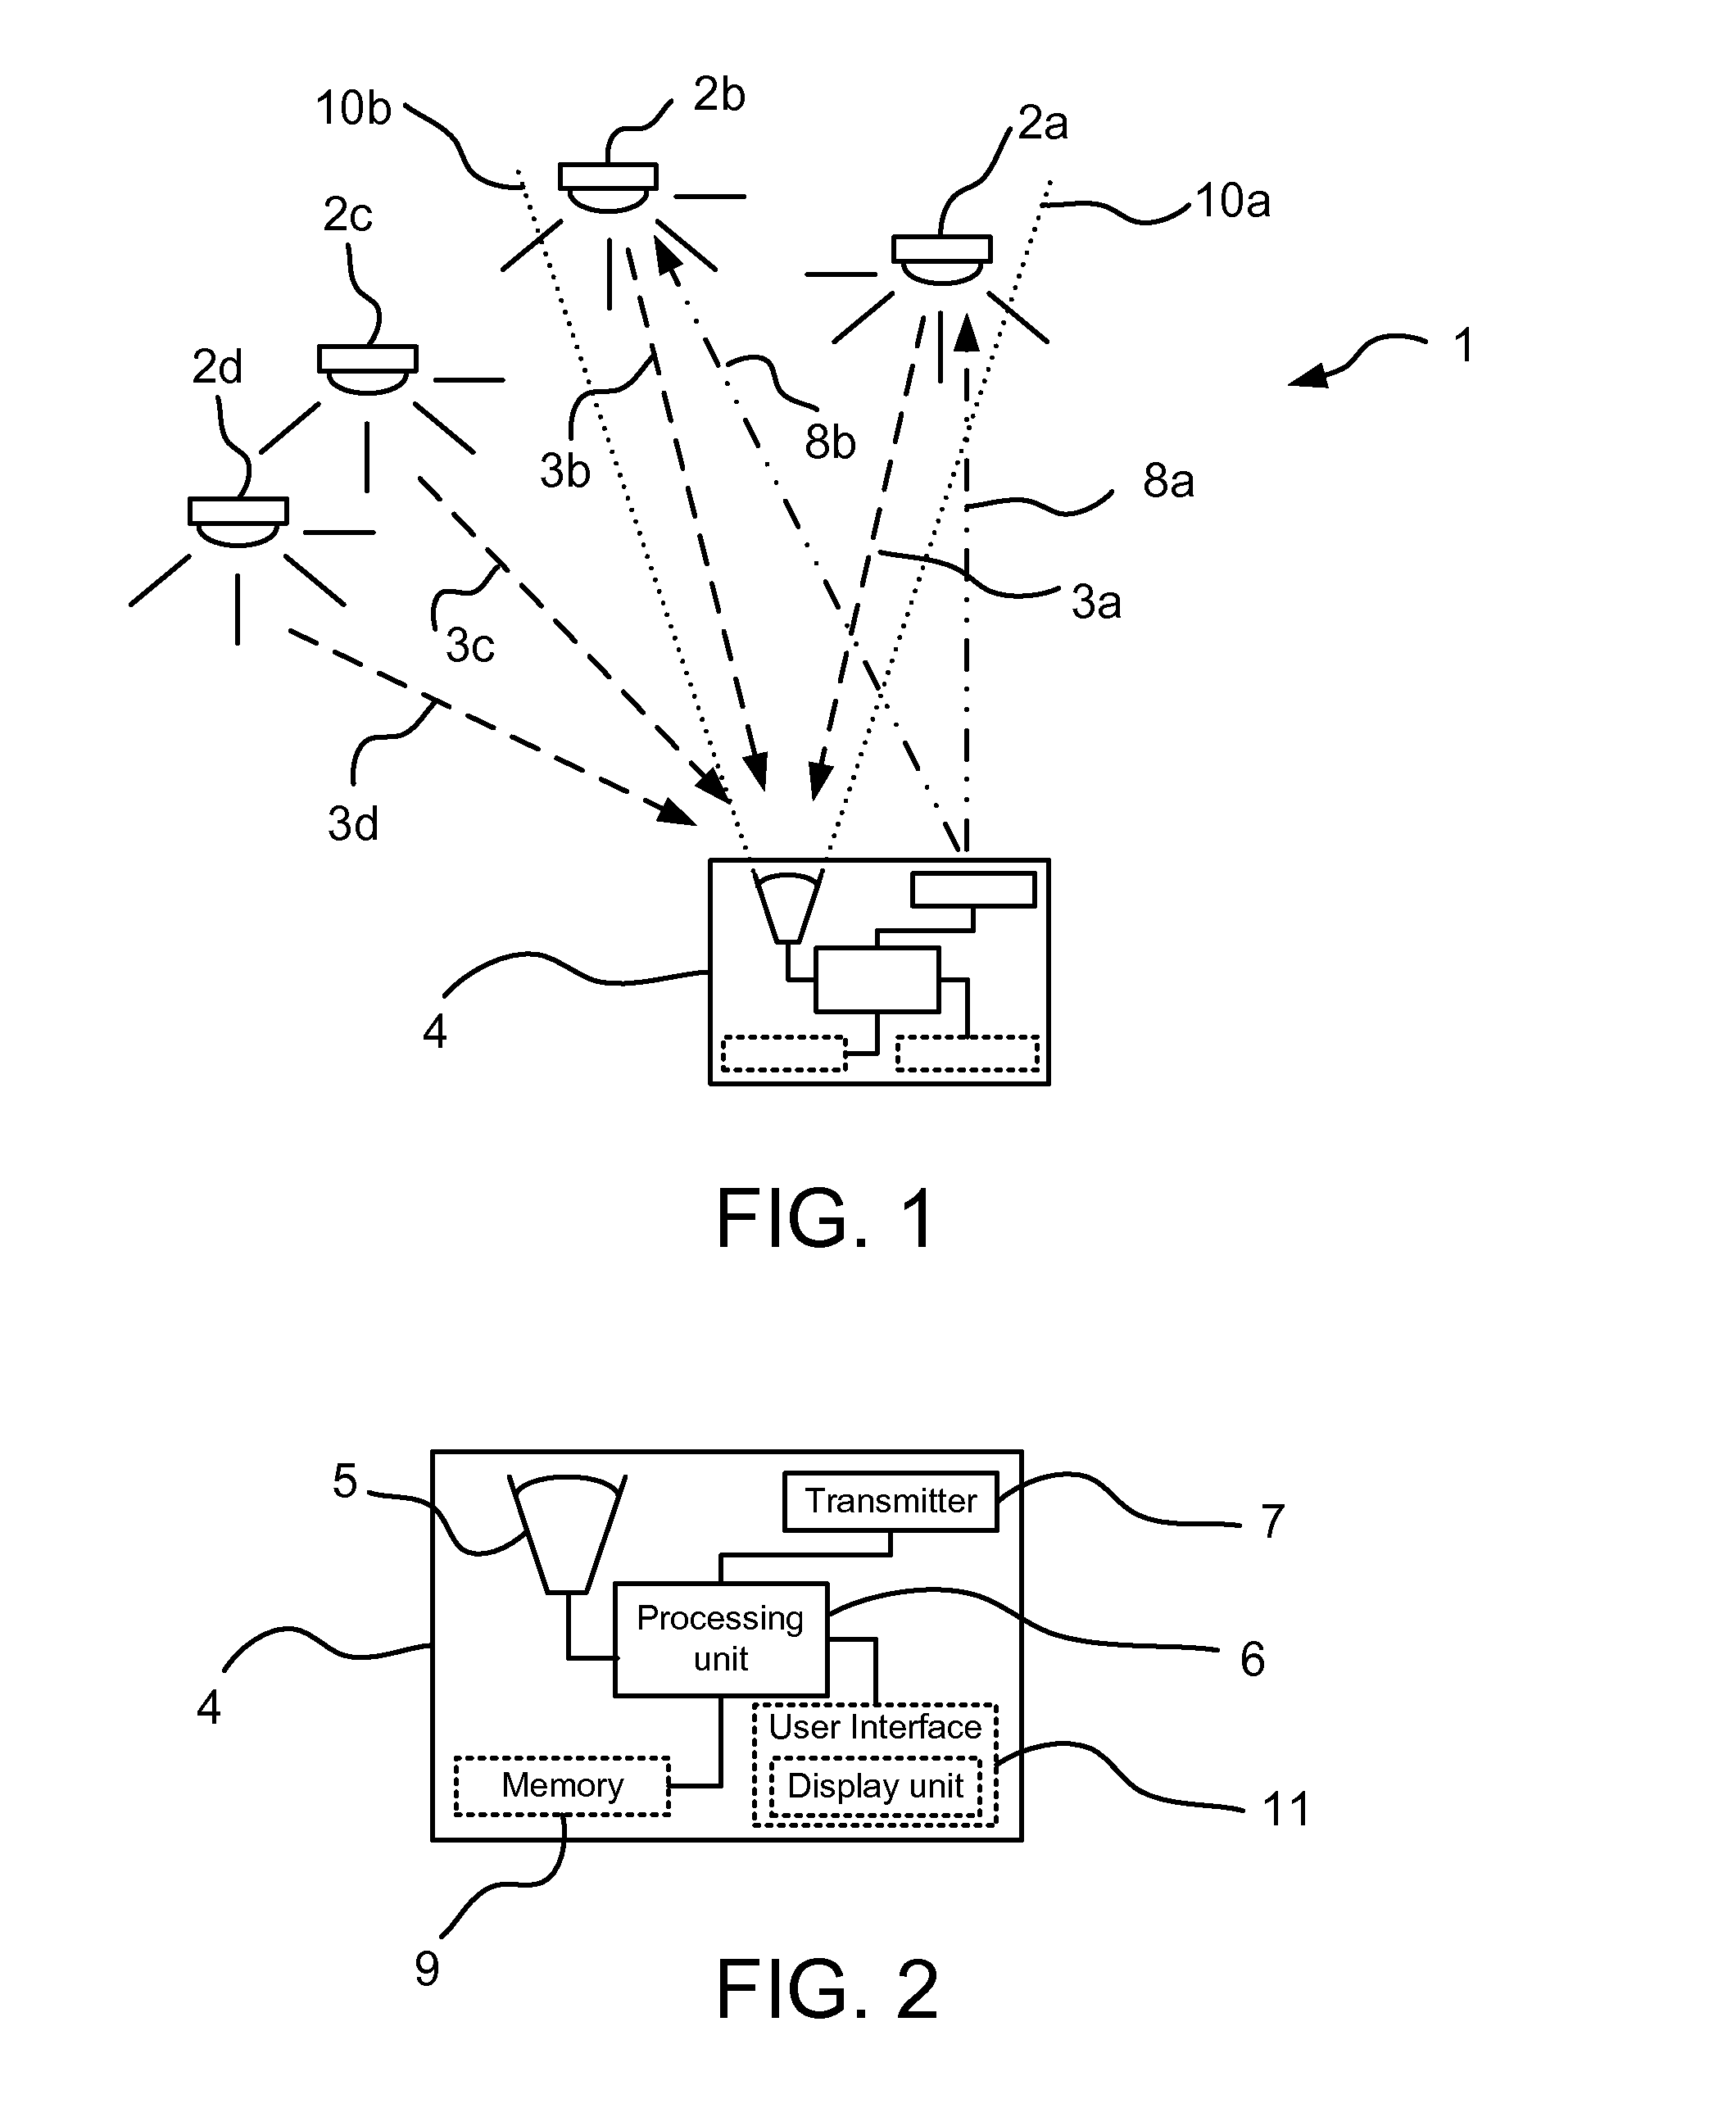 Remote control of light source